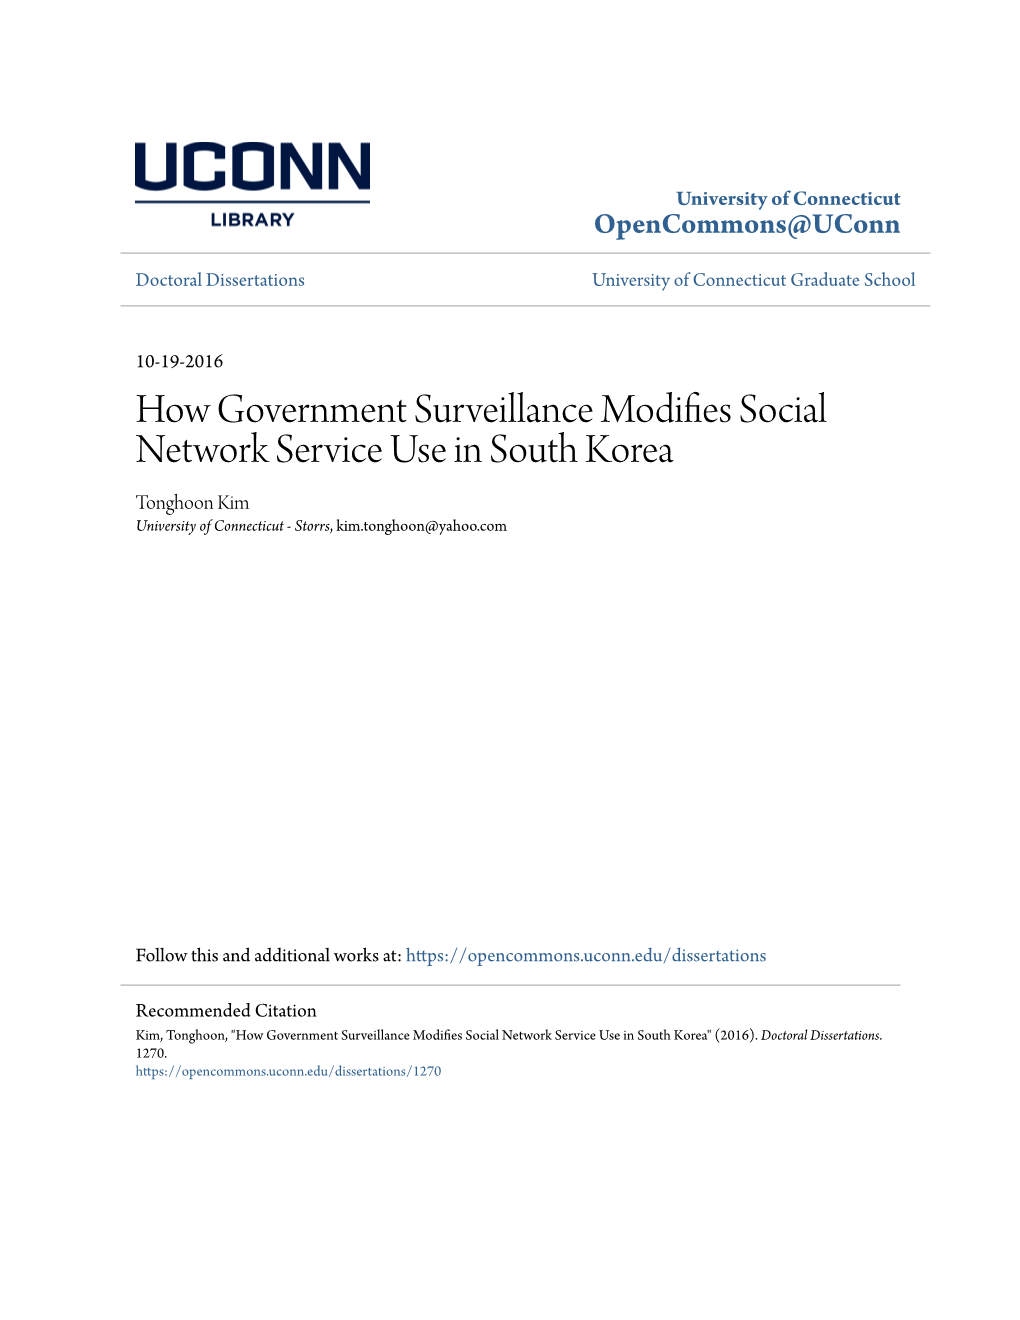 How Government Surveillance Modifies Social Network Service Use in South Korea" (2016)